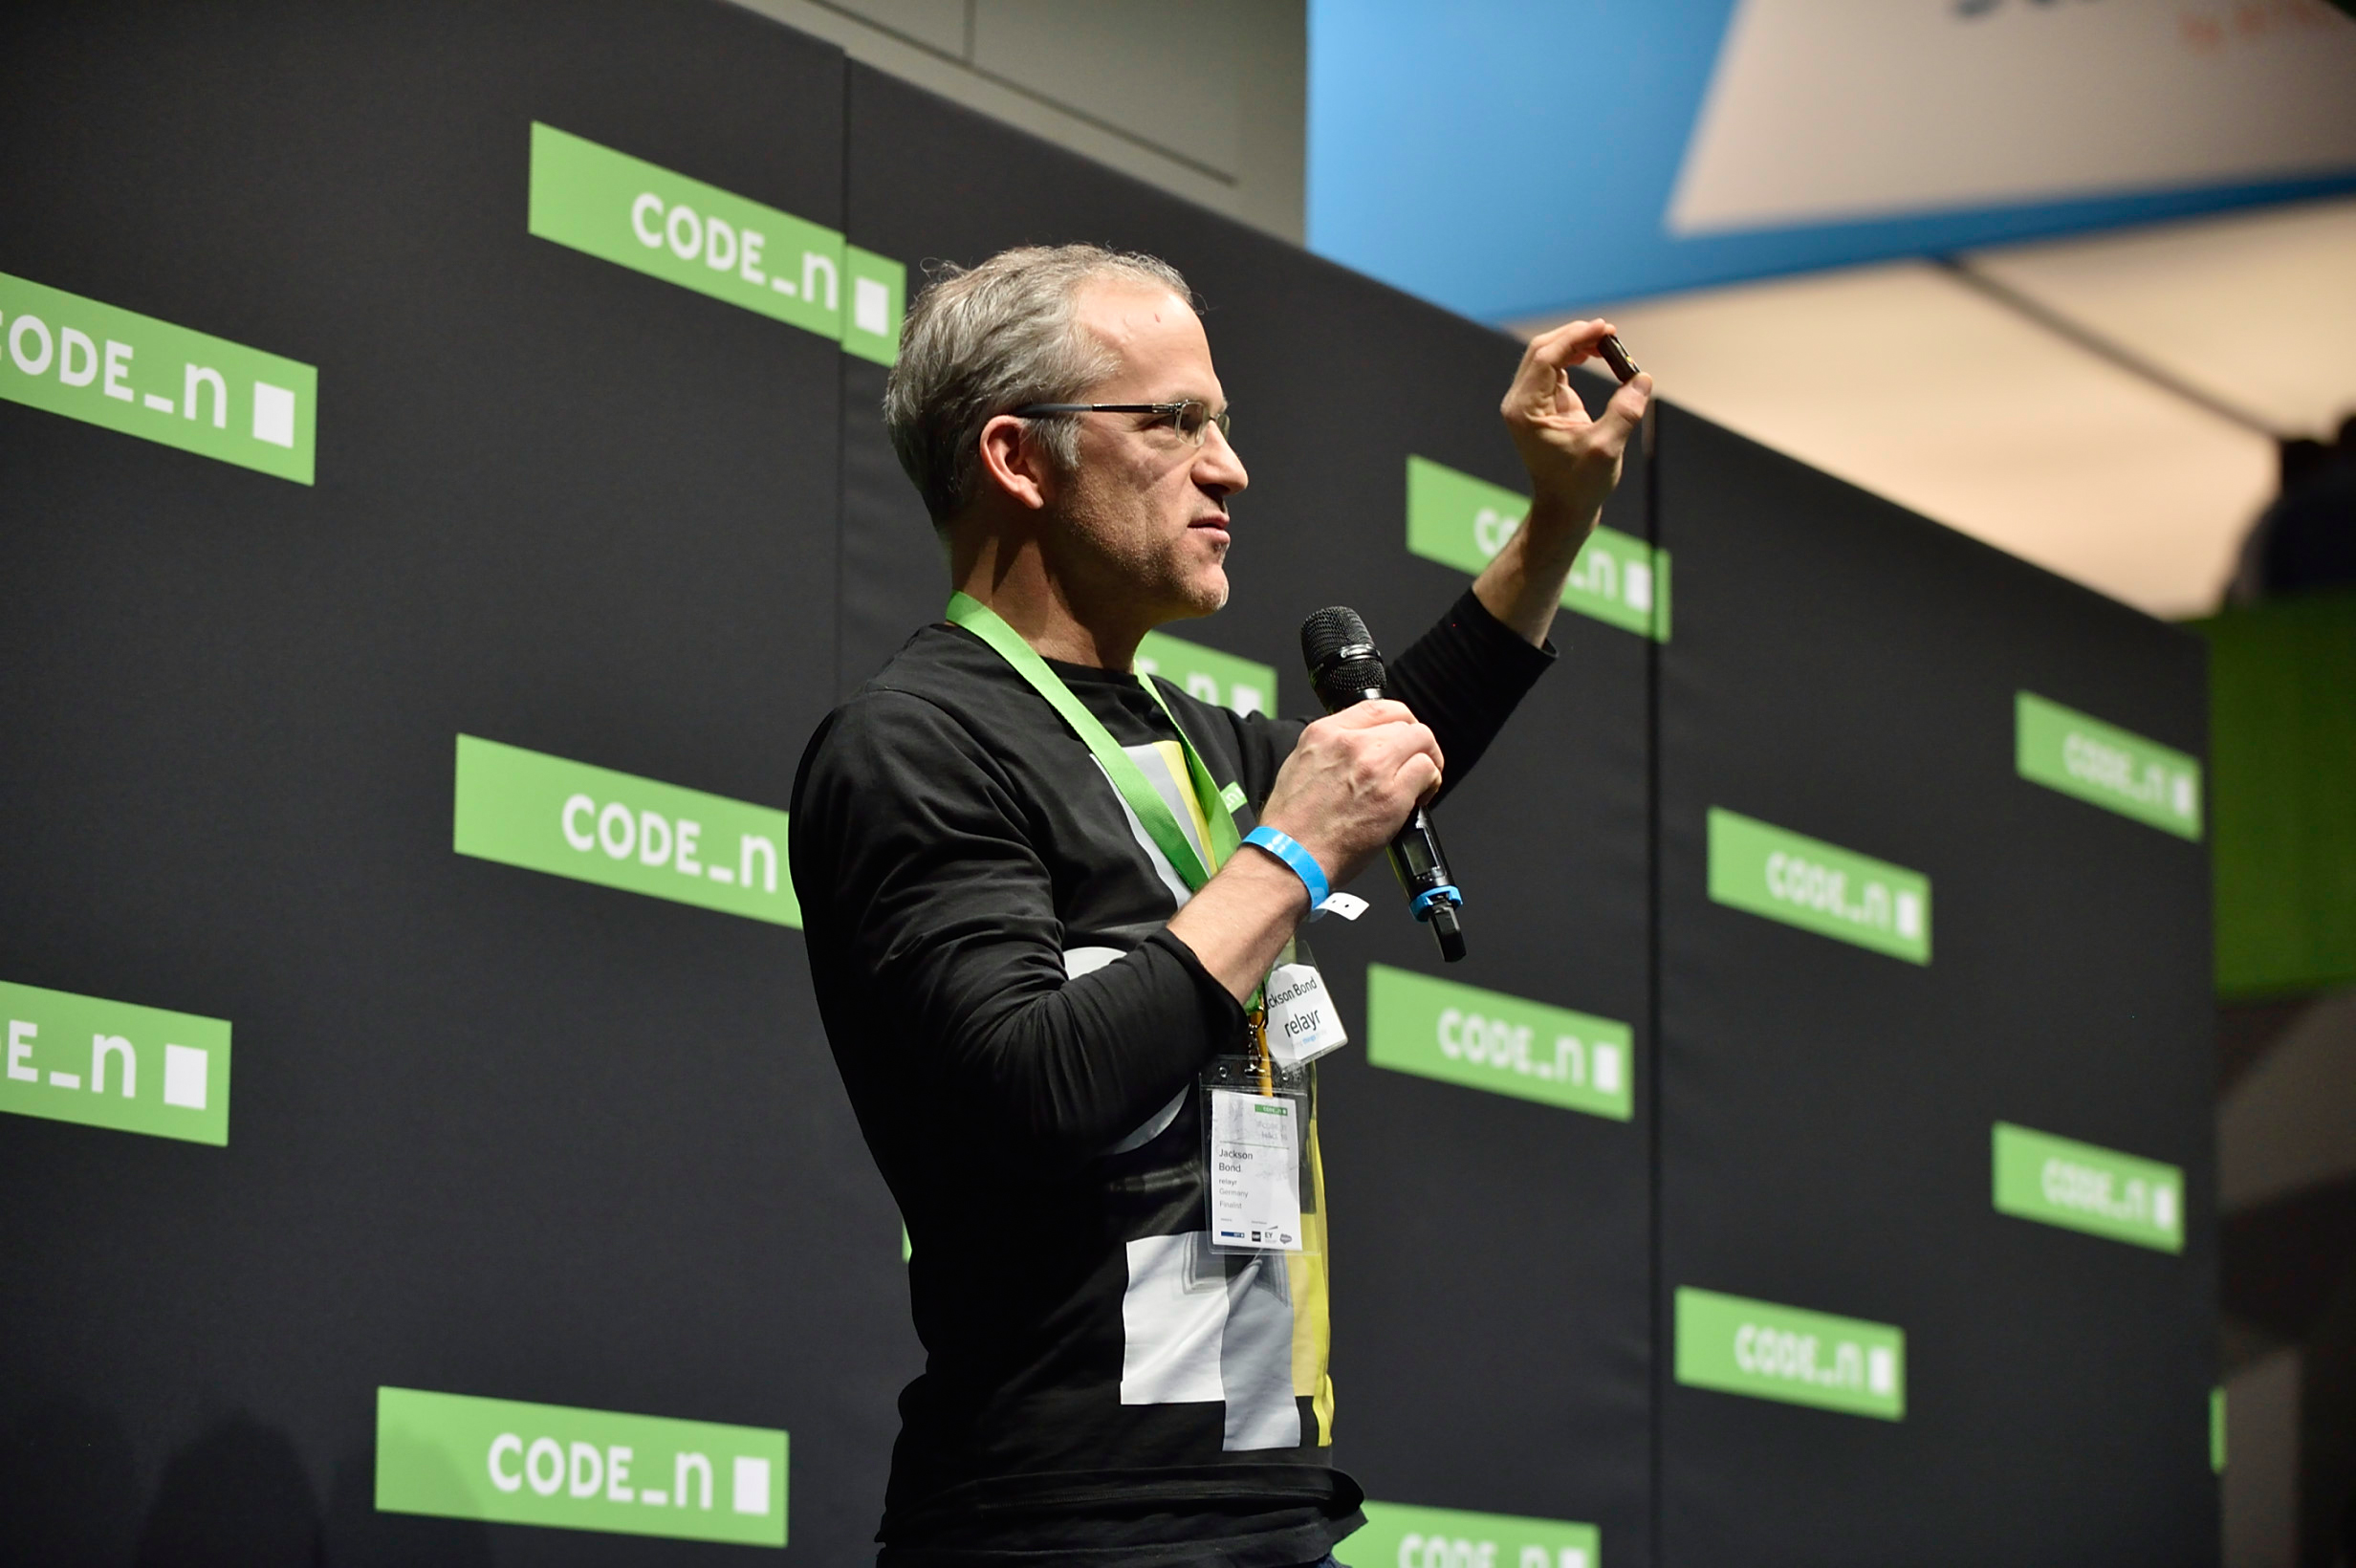 Relayr pitches Code_n at CeBIT